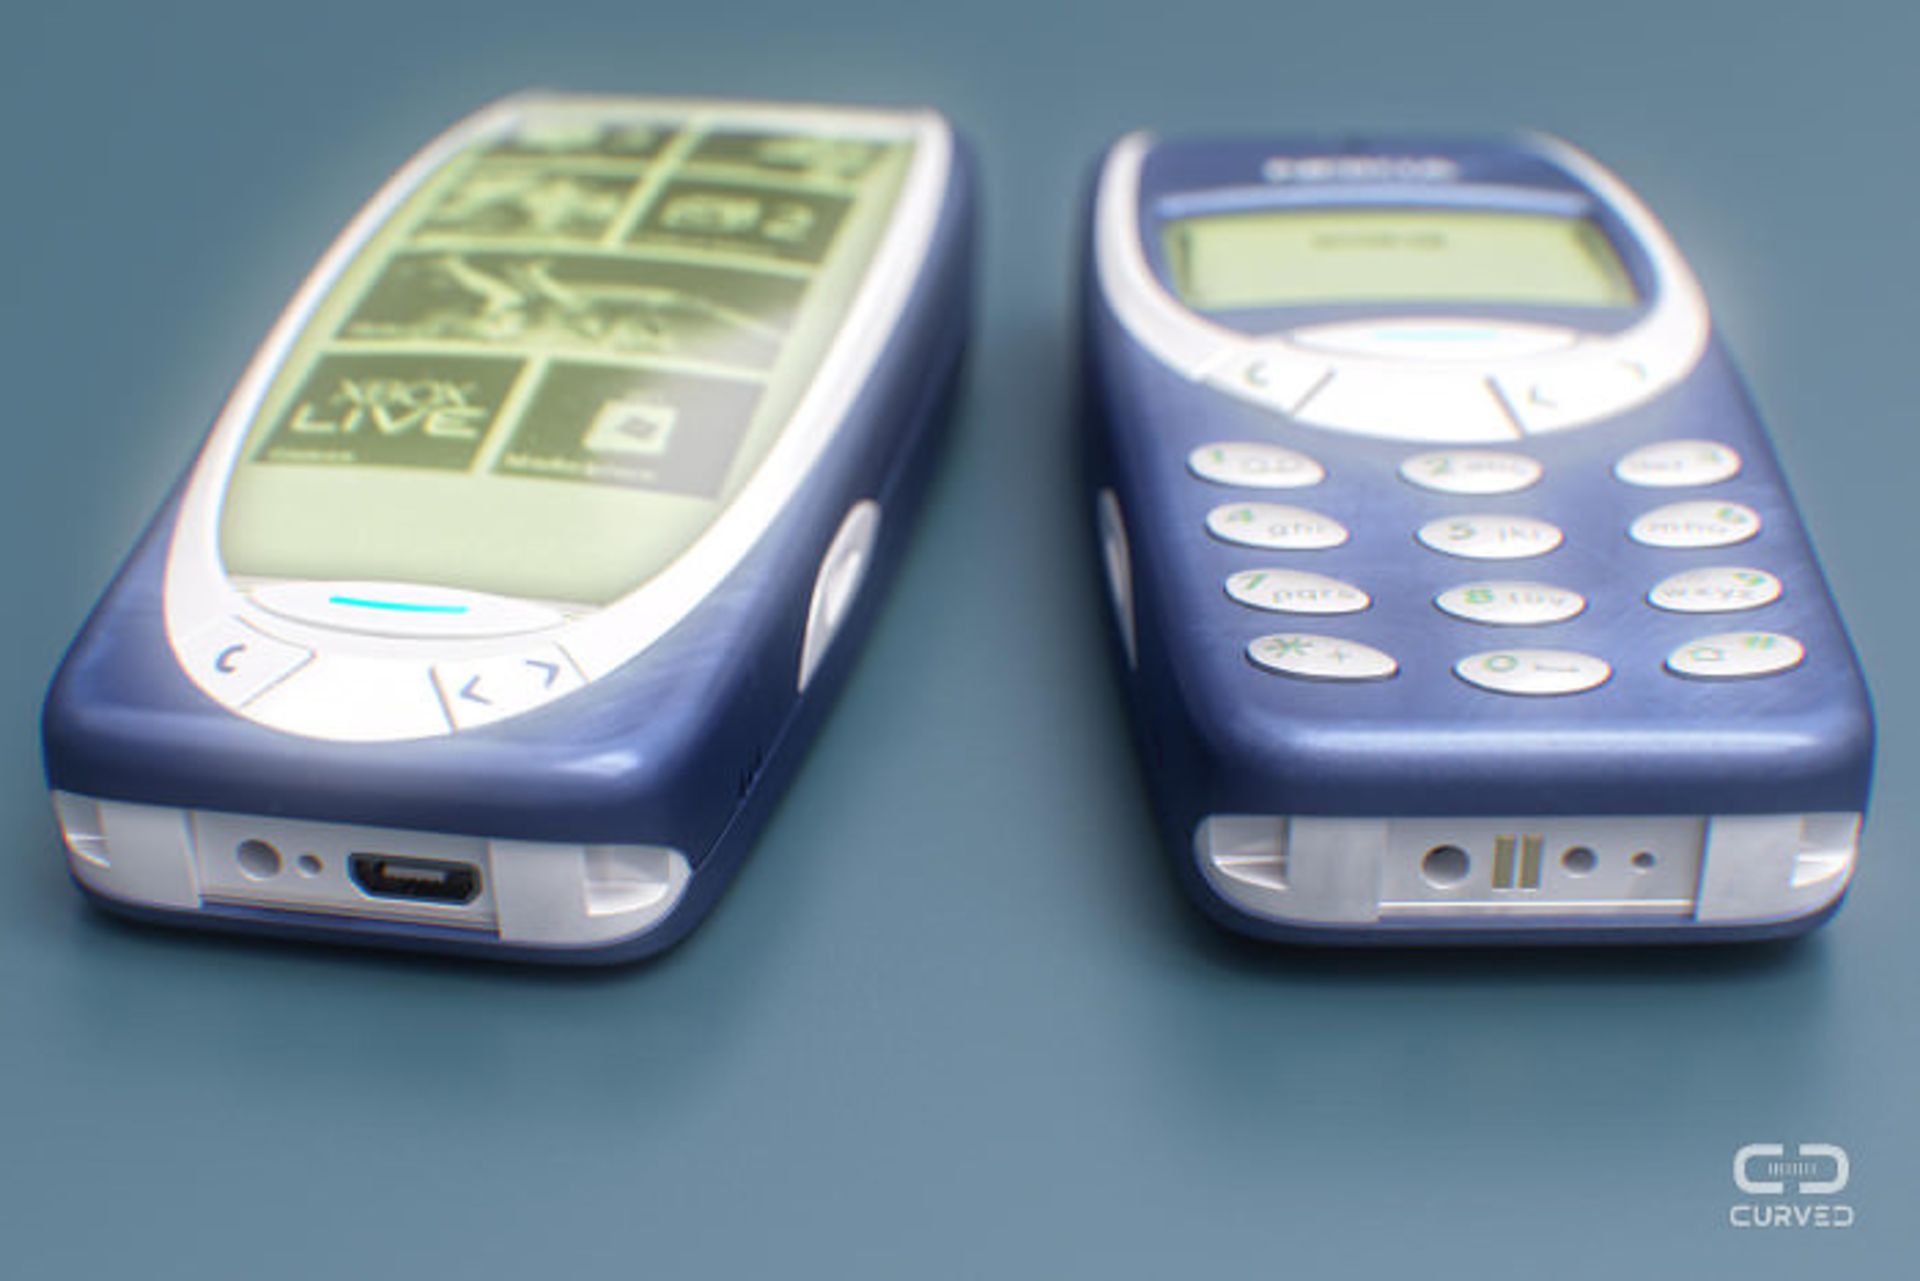 What-if-featurephones-were-smart 4